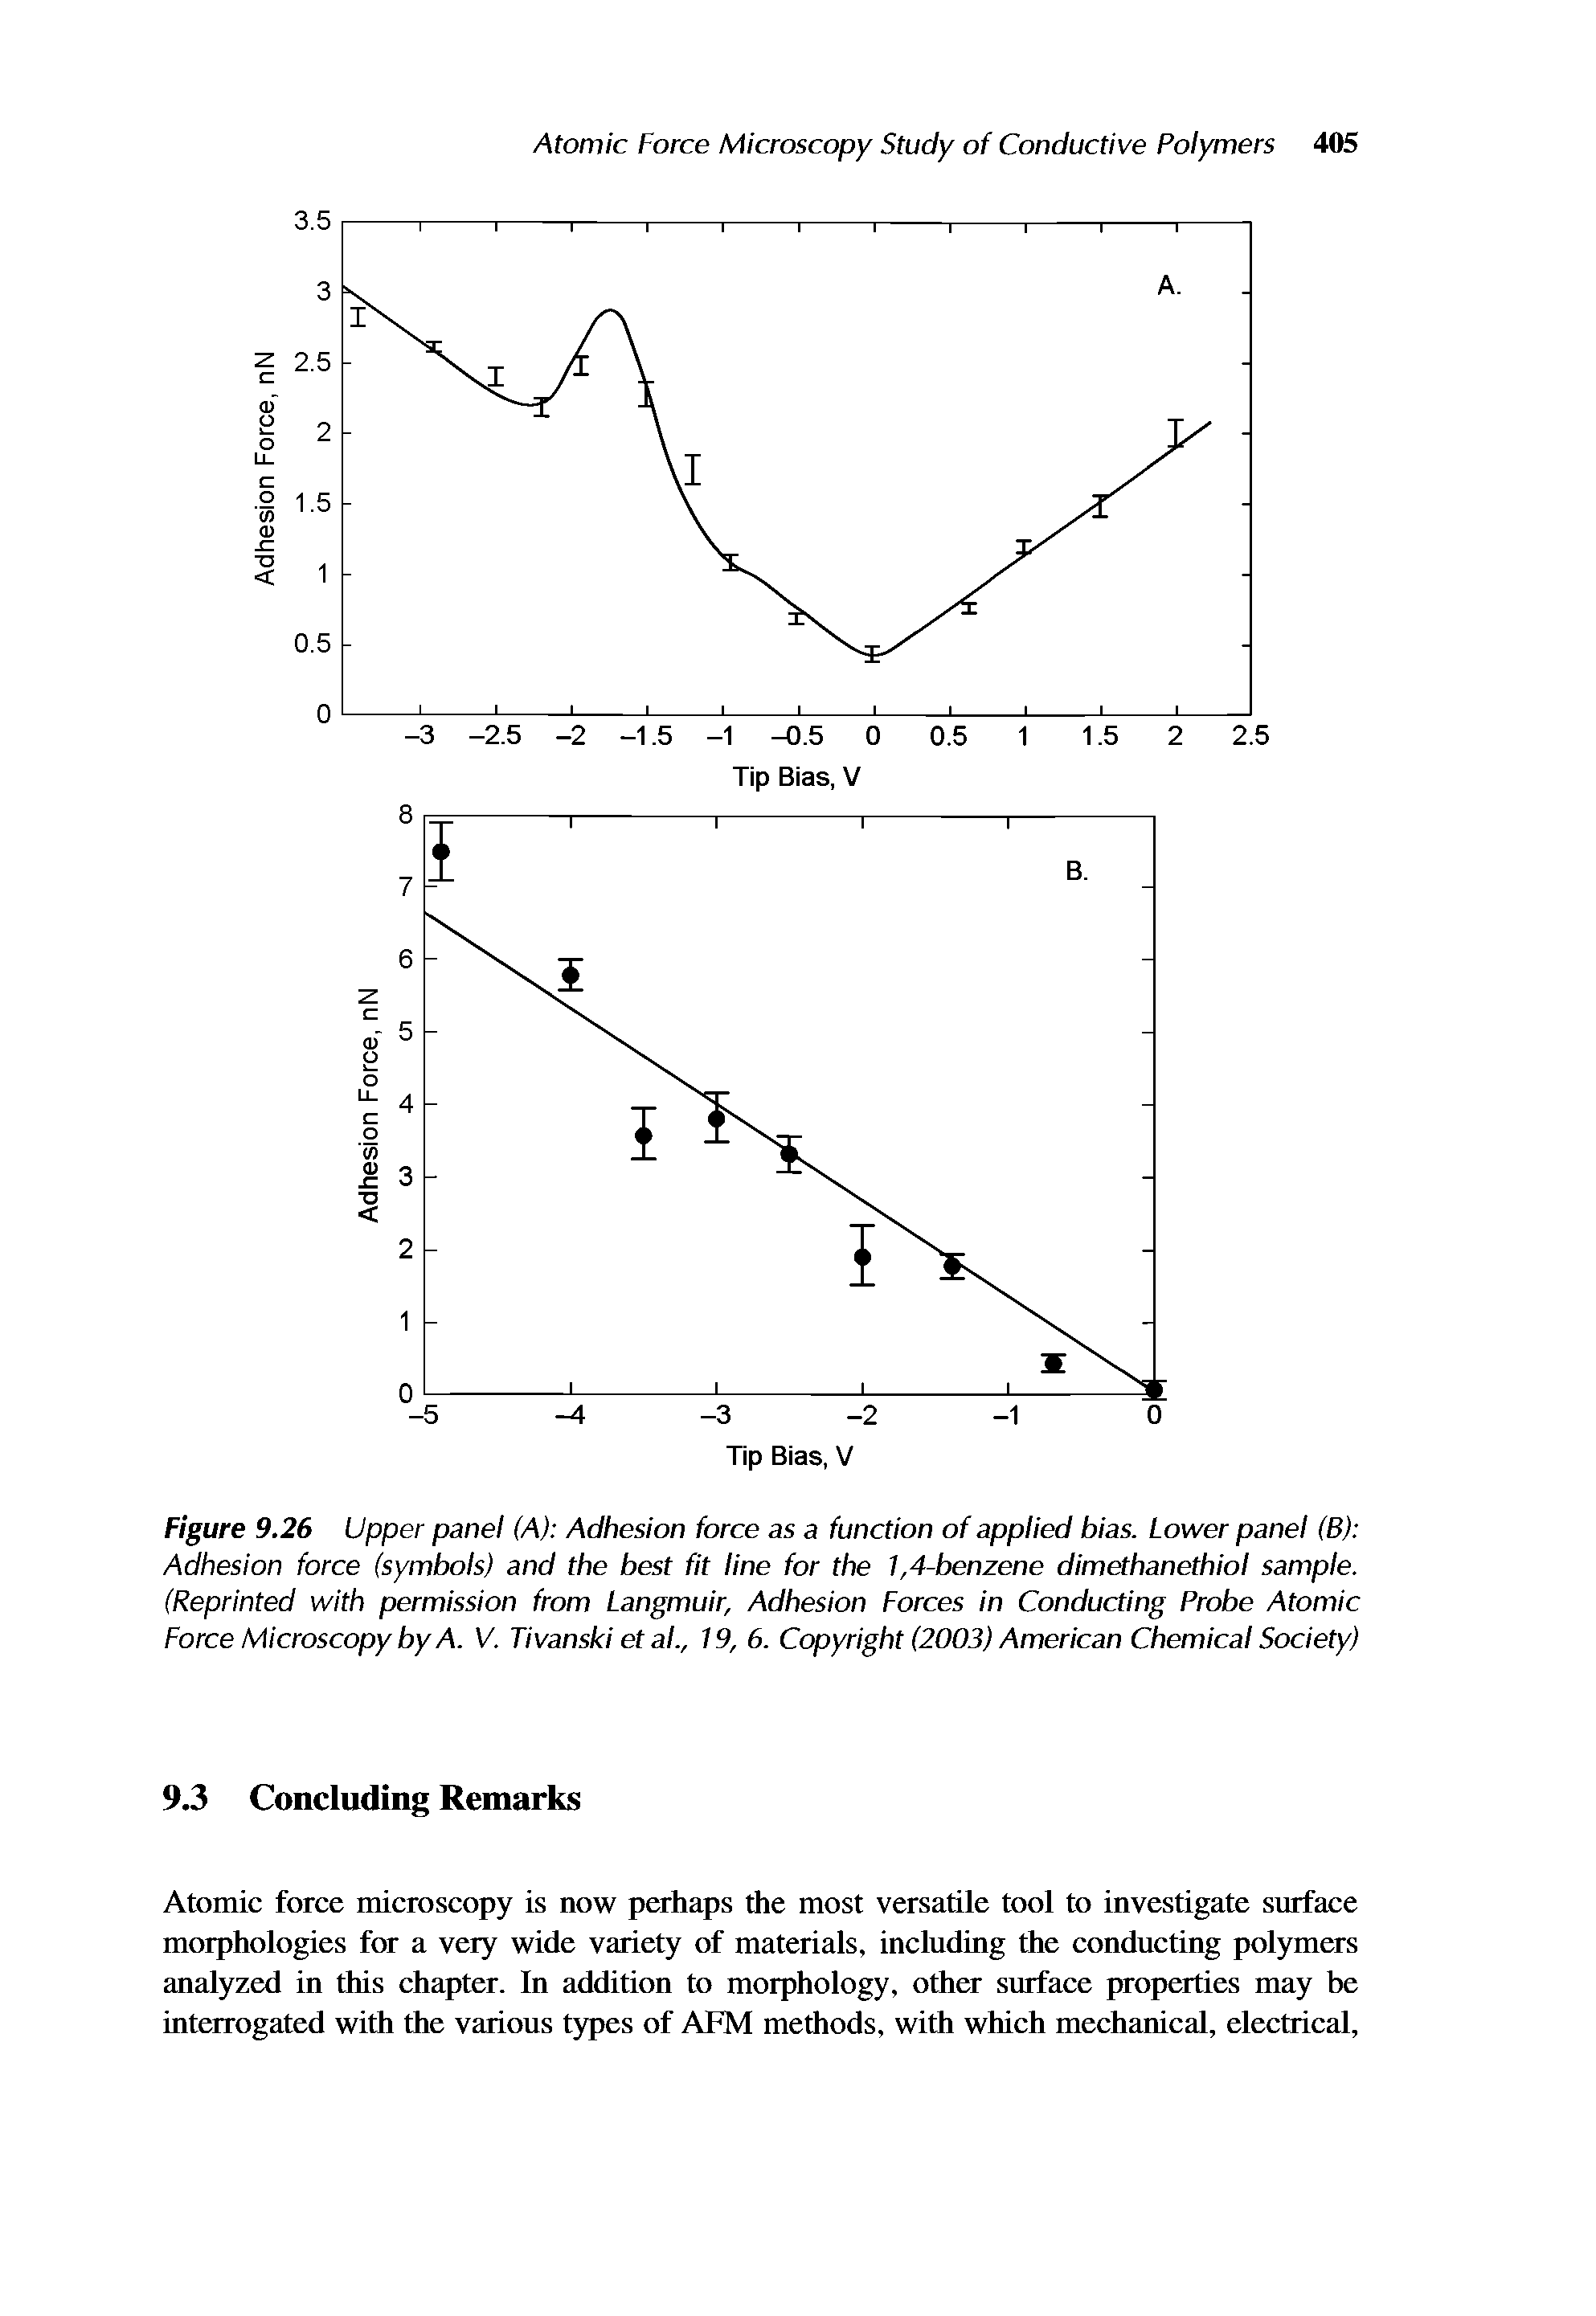 Figure 9.26 Upper panel (A) Adhesion force as a function of applied bias. Lower panel (B) Adhesion force (symbols) and the best fit line for the 1,4-benzene dimethanethiol sample. (Reprinted with permission from Langmuir, Adhesion Forces in Conducting Probe Atomic Force Microscopy by A. V. Tivanski etal., 19, 6. Copyright (2003) American Chemical Society)...